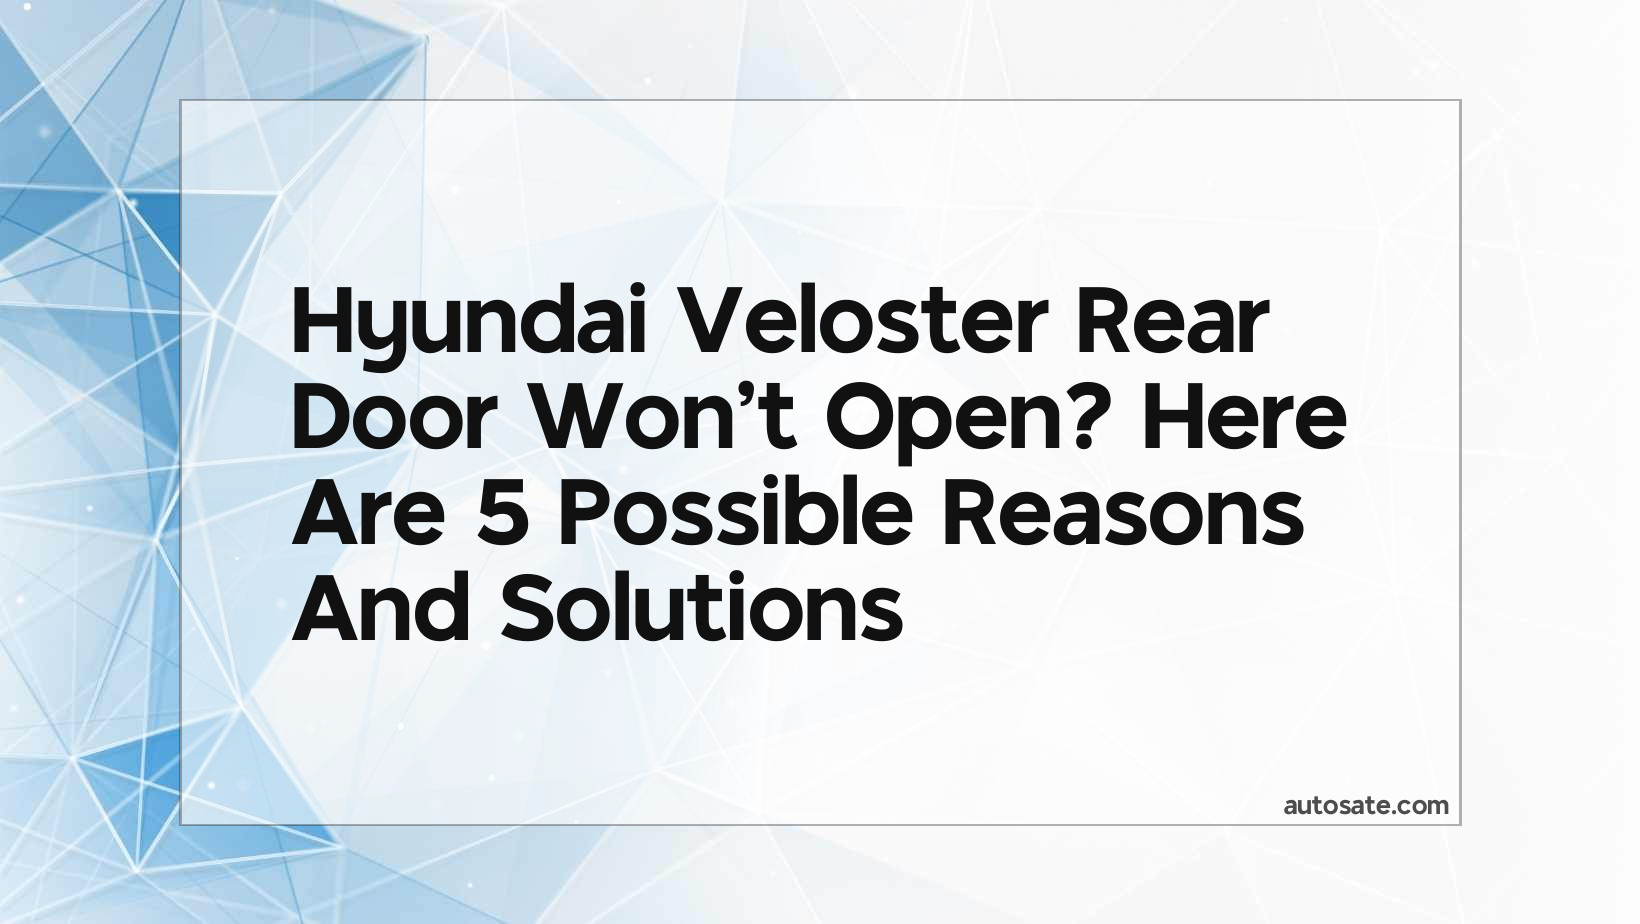 Hyundai Veloster Rear Door Won&#8217;t Open? Here Are 5 Possible Reasons And Solutions